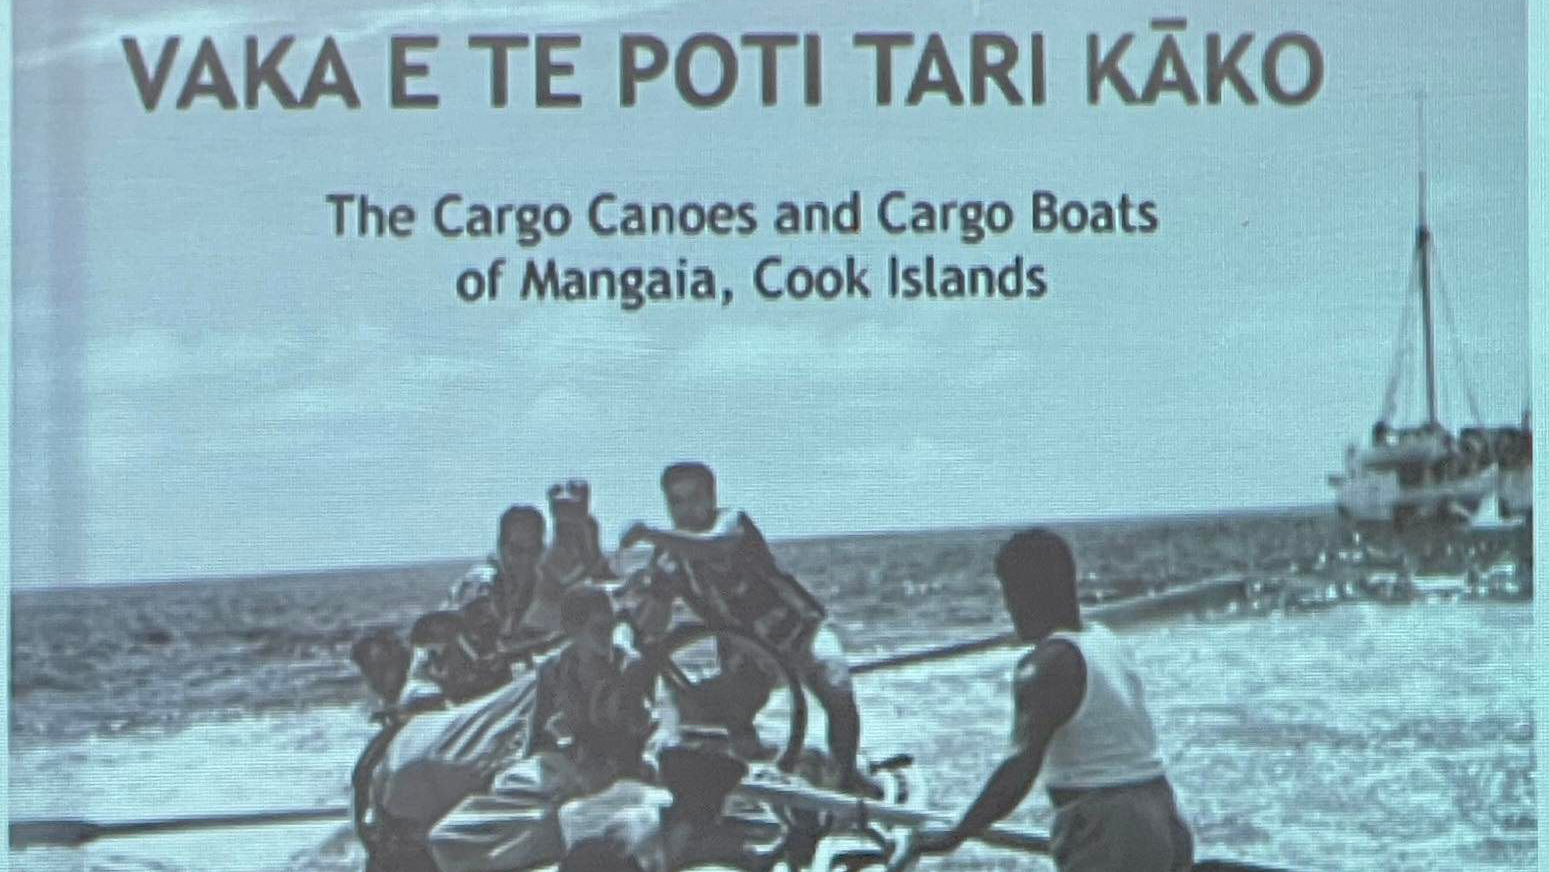 Book on lost era of heroic Mangaian boatmen launched